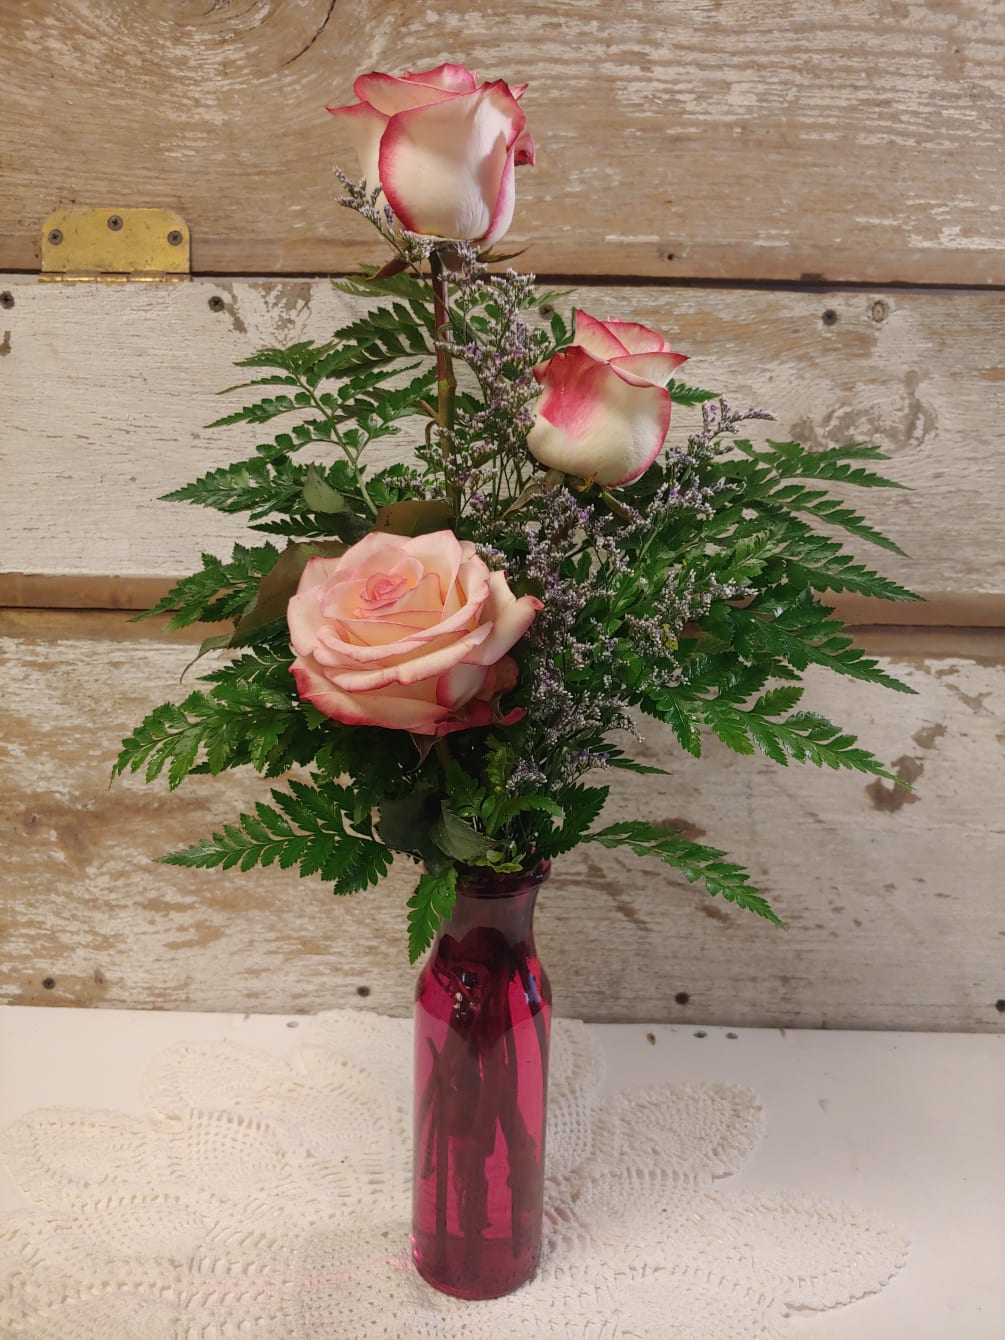 Three Roses in a bud vase